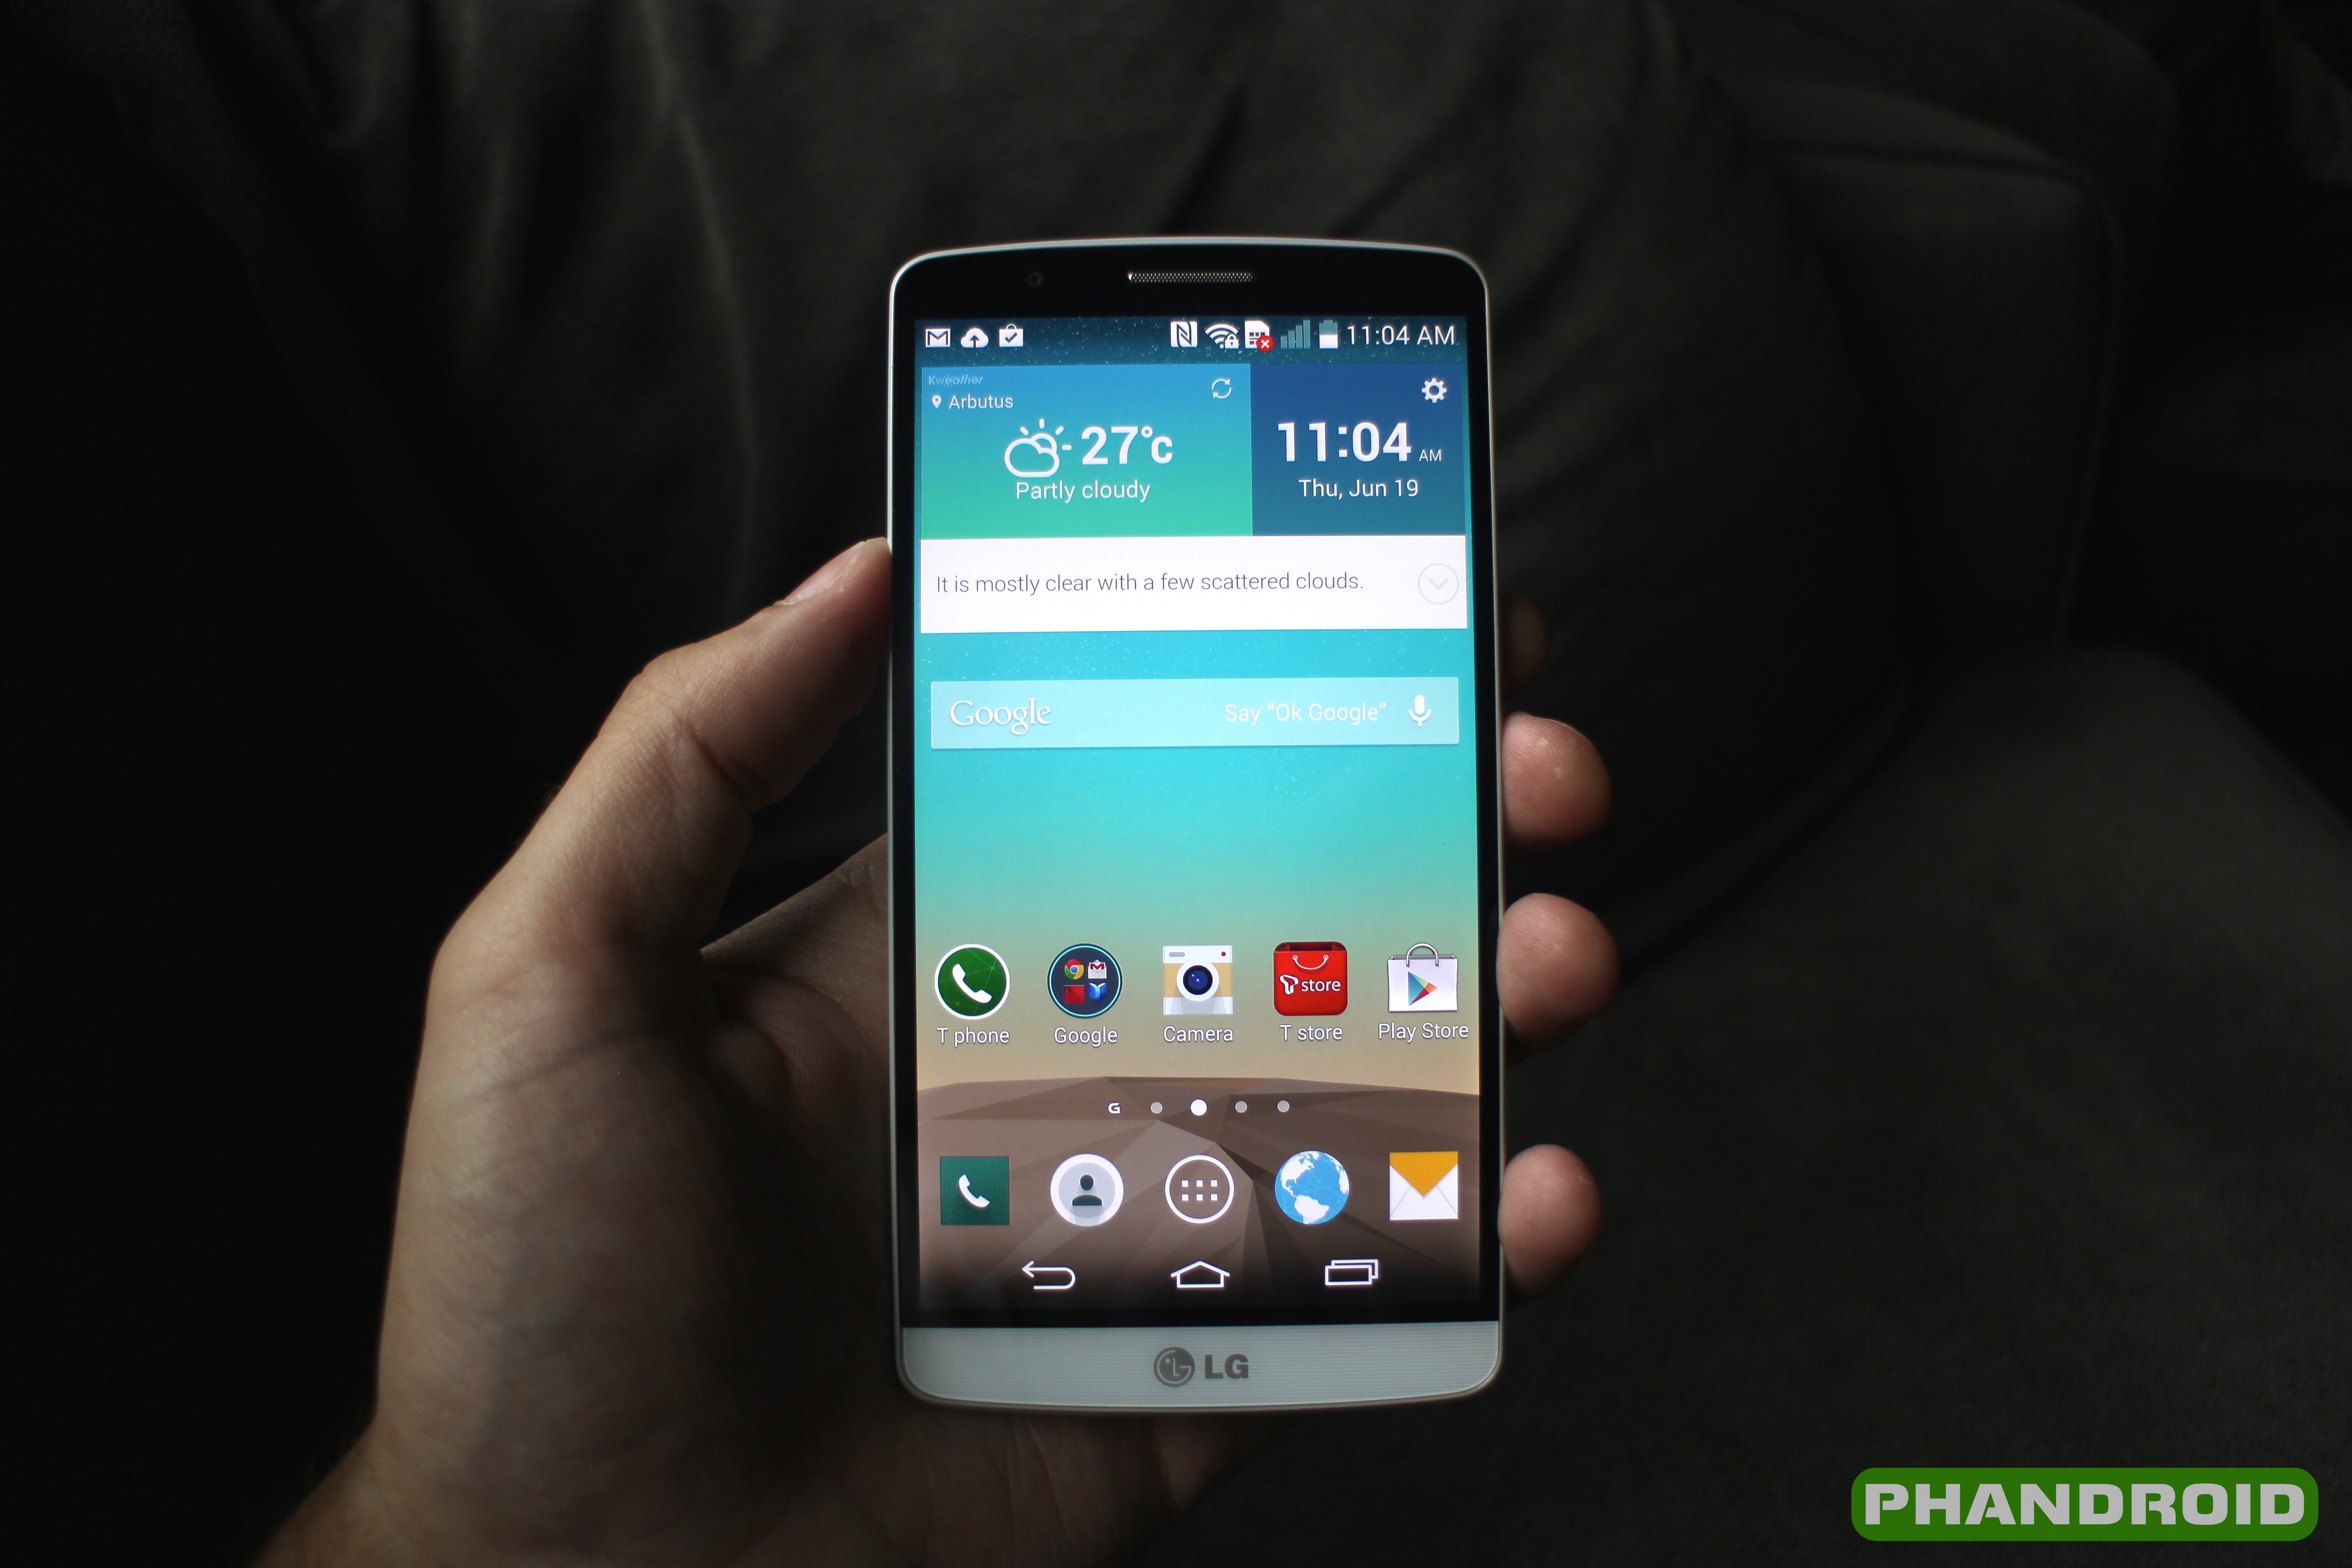 LG G3 Review - Phandroid